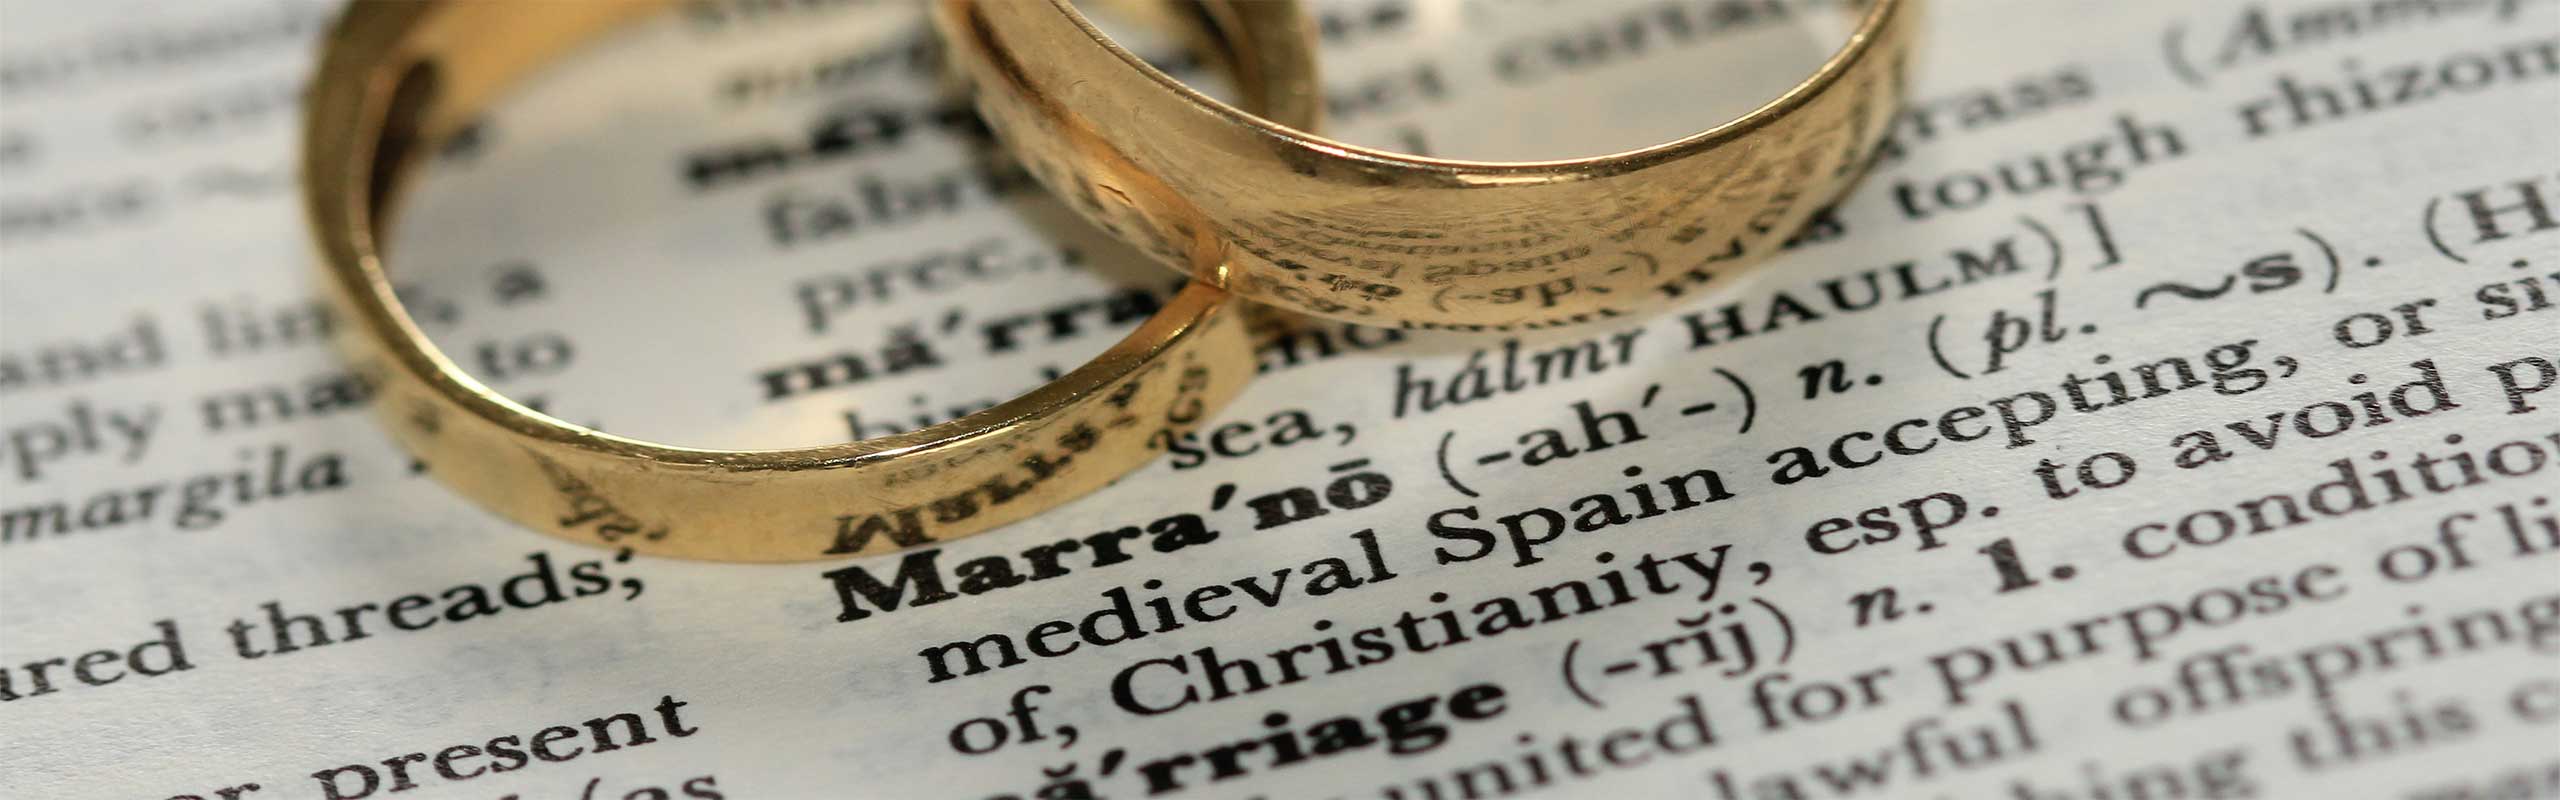 Top 3 Reasons to Use Marriage Certificate Translations